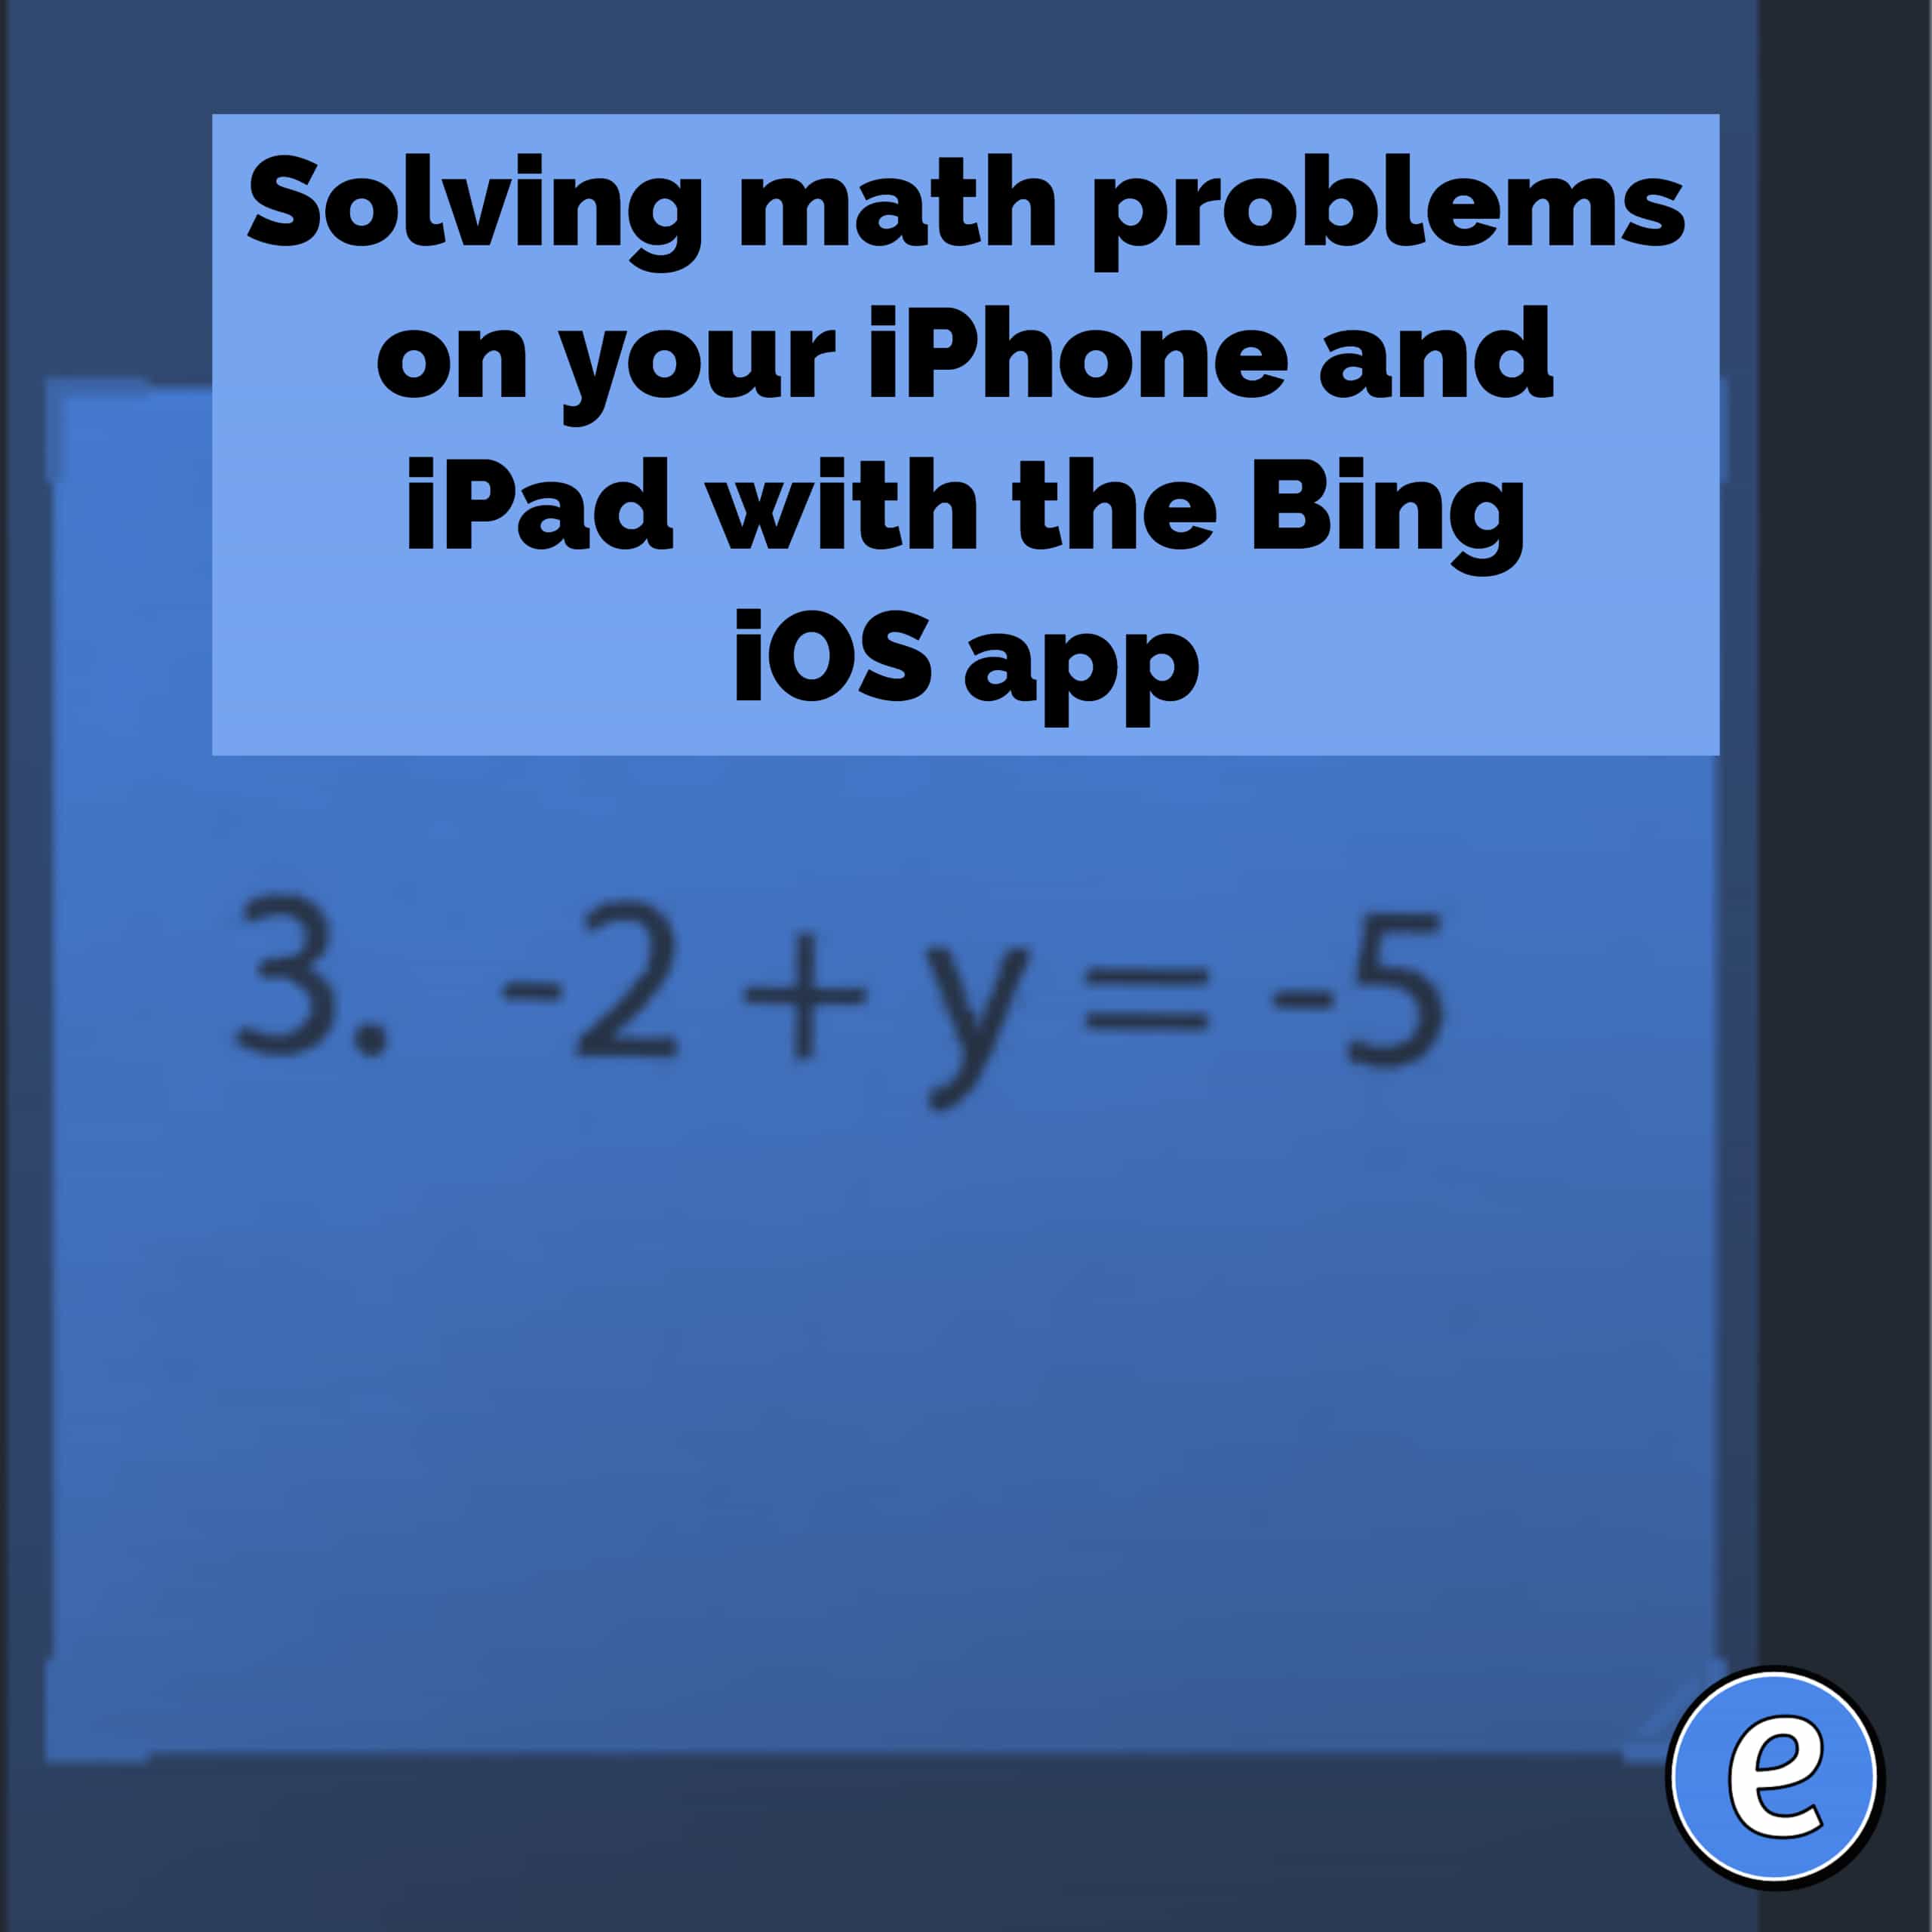 Solving math problems on your iPhone and iPad with the Bing iOS app